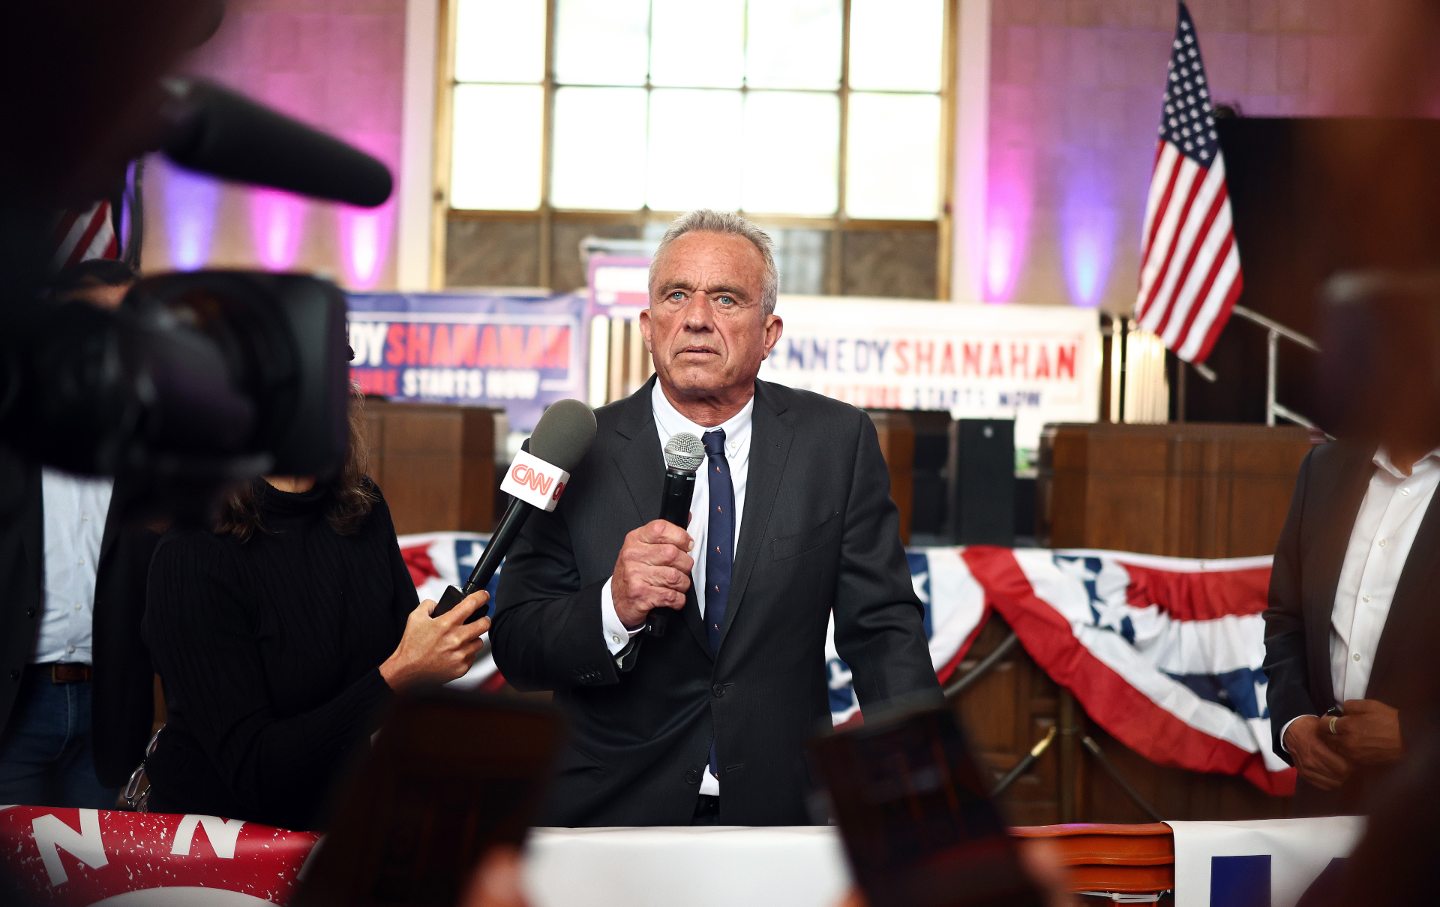 RFK Jr. at a podium holding a microphone.